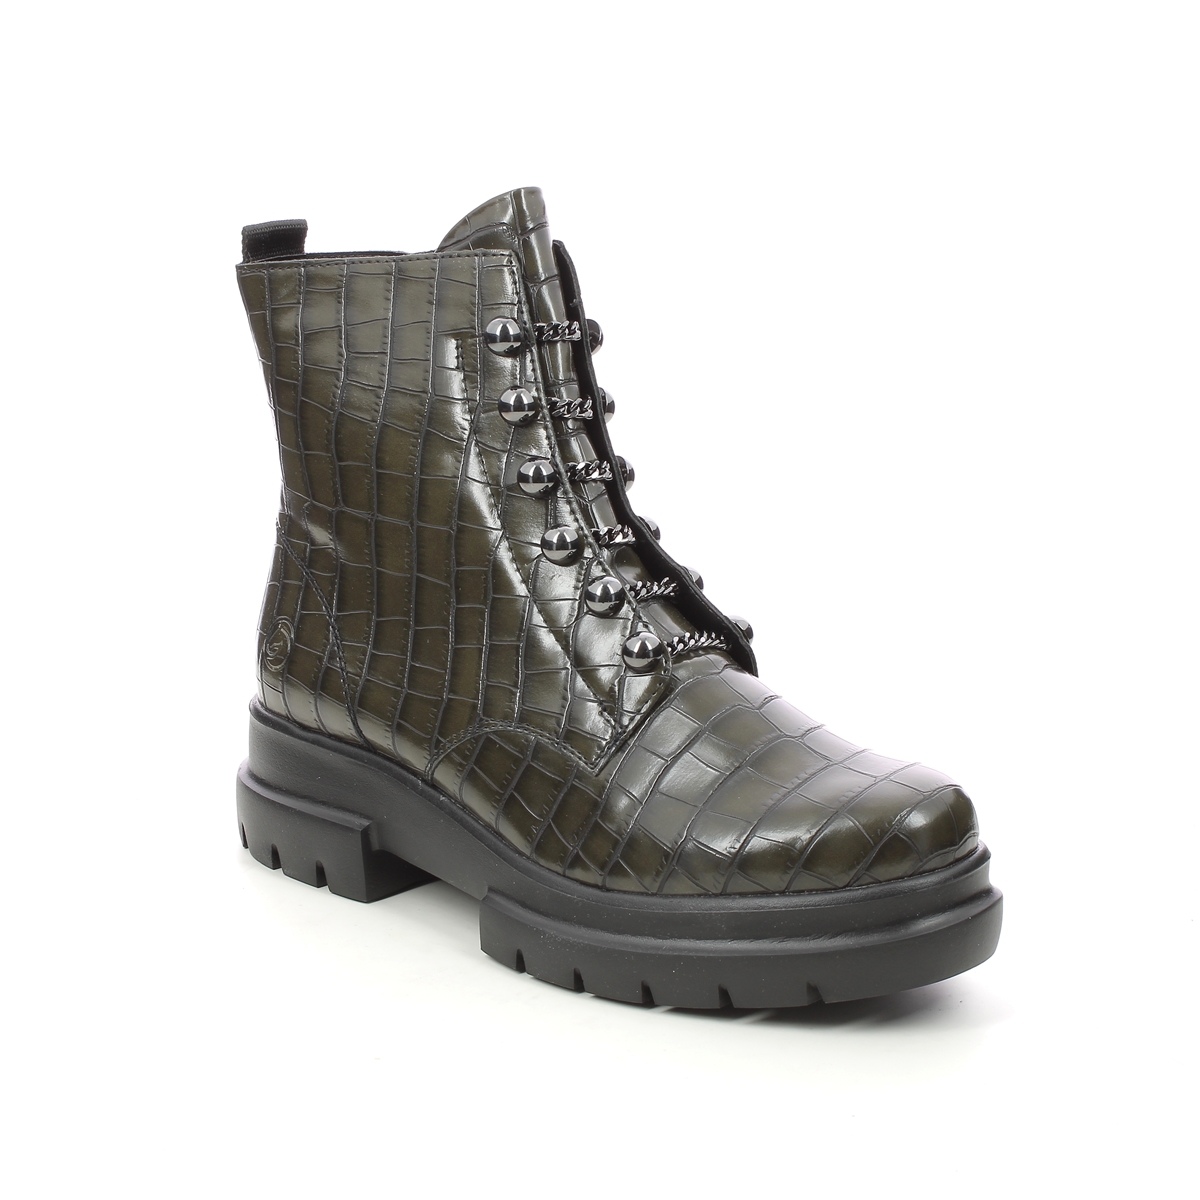 Remonte Chunky Green Croc Womens Biker Boots D8977-54 In Size 41 In Plain Green Croc Effect